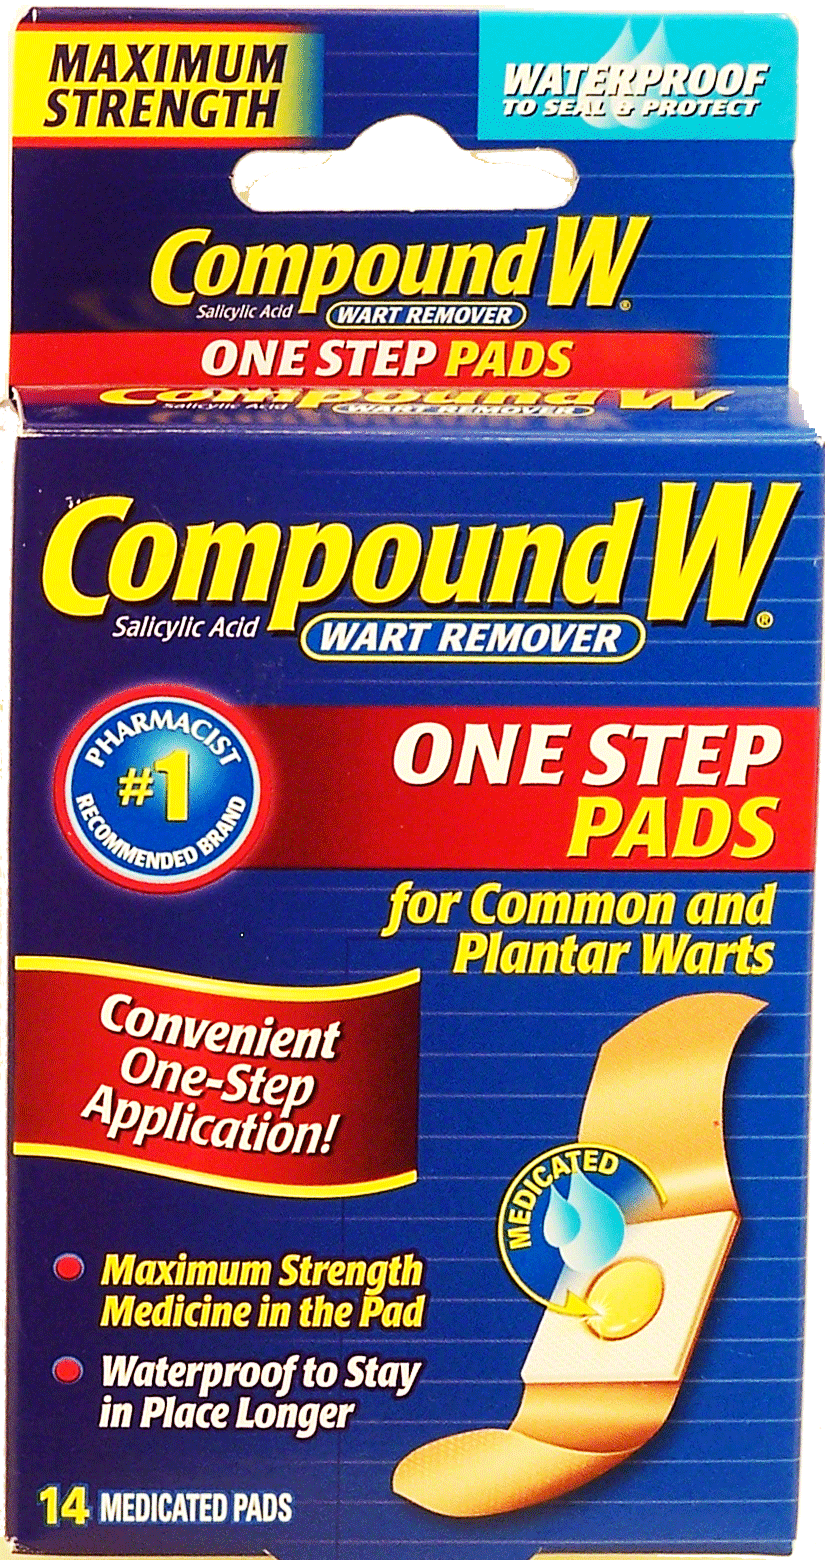 Compound W One Step Pads salicylic acid wart remover, medicated pads Full-Size Picture